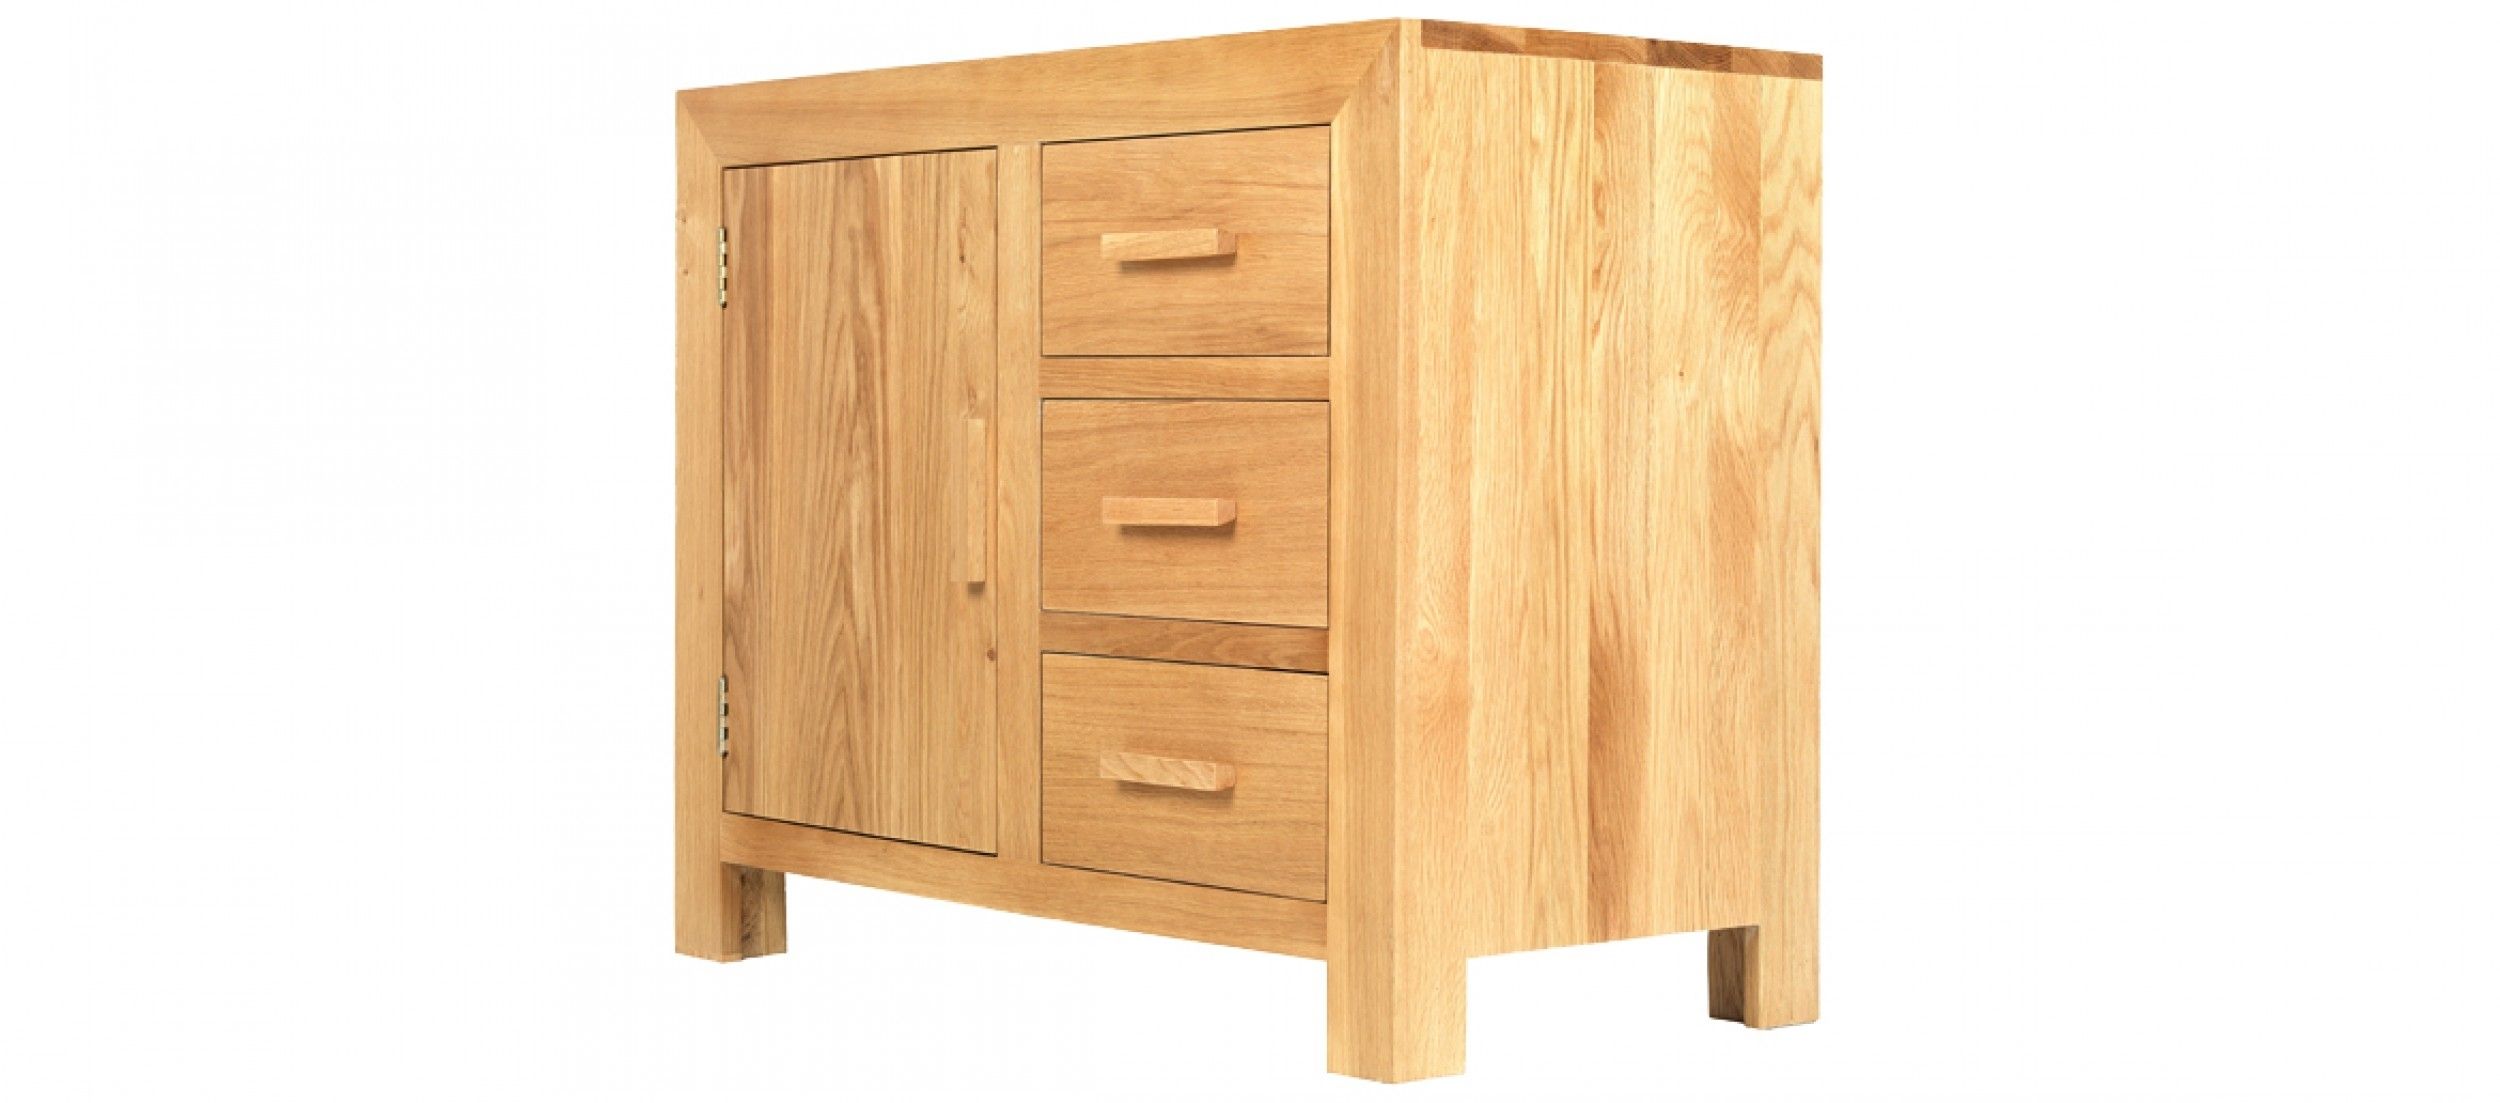 Cube Oak Small Sideboard | Quercus Living Throughout Newest 4 Door/4 Drawer Cast Jali Sideboards (View 18 of 20)